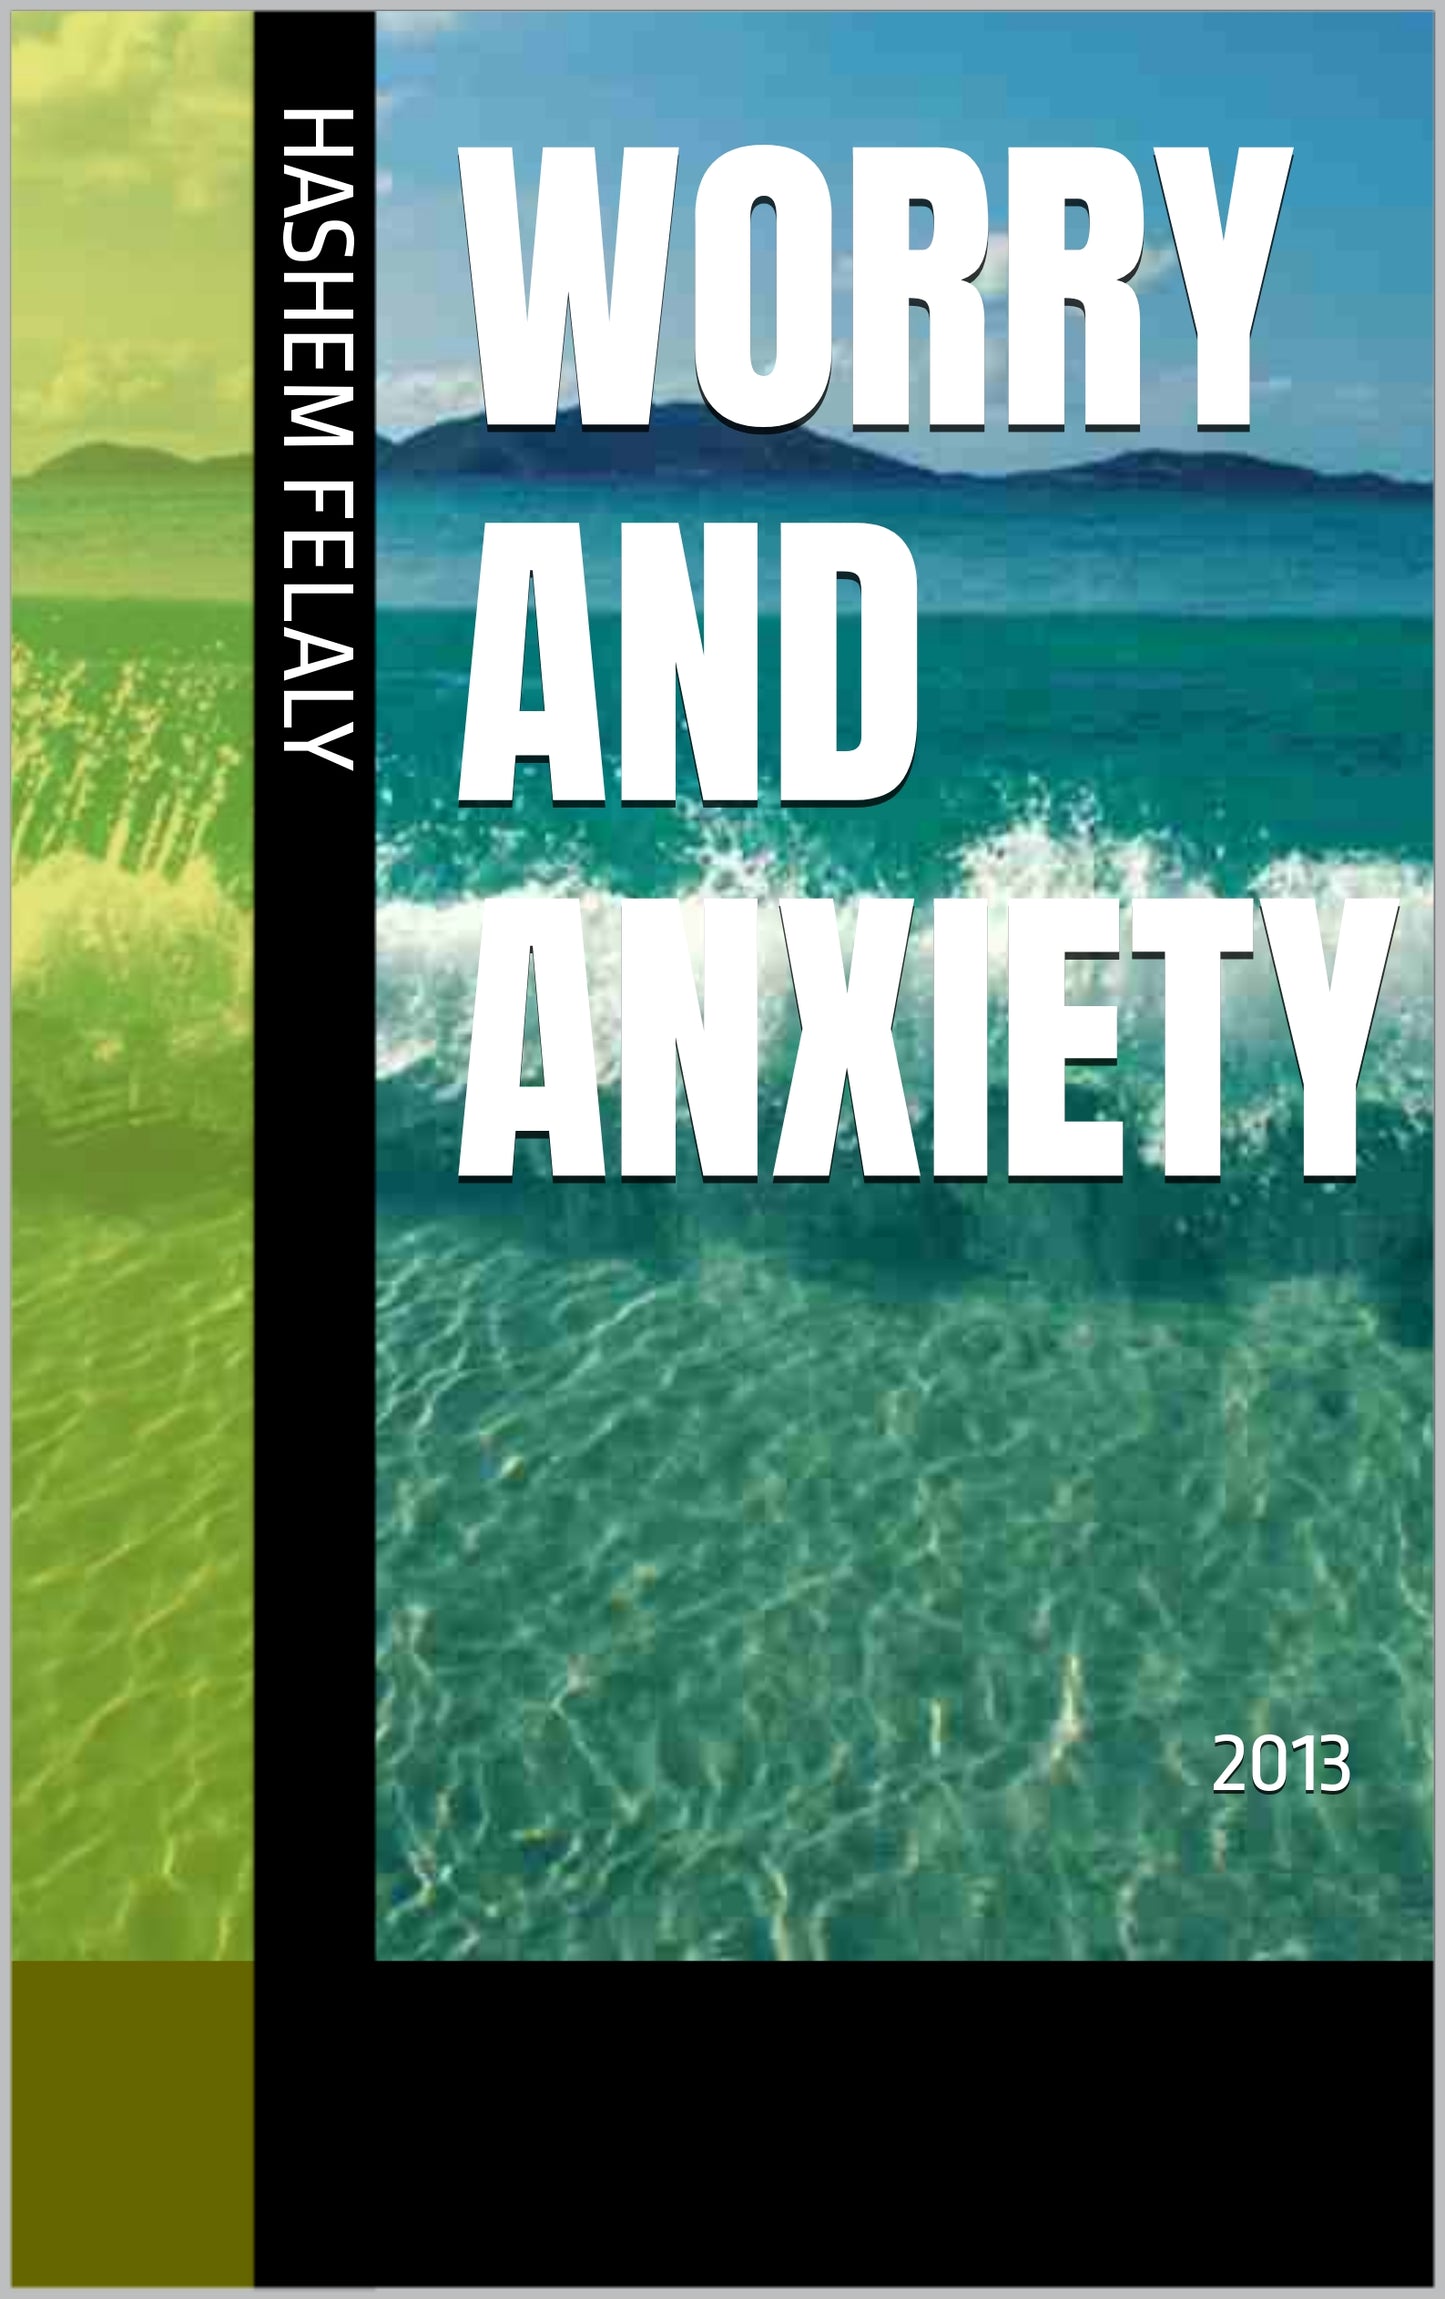 Worry and anxiety